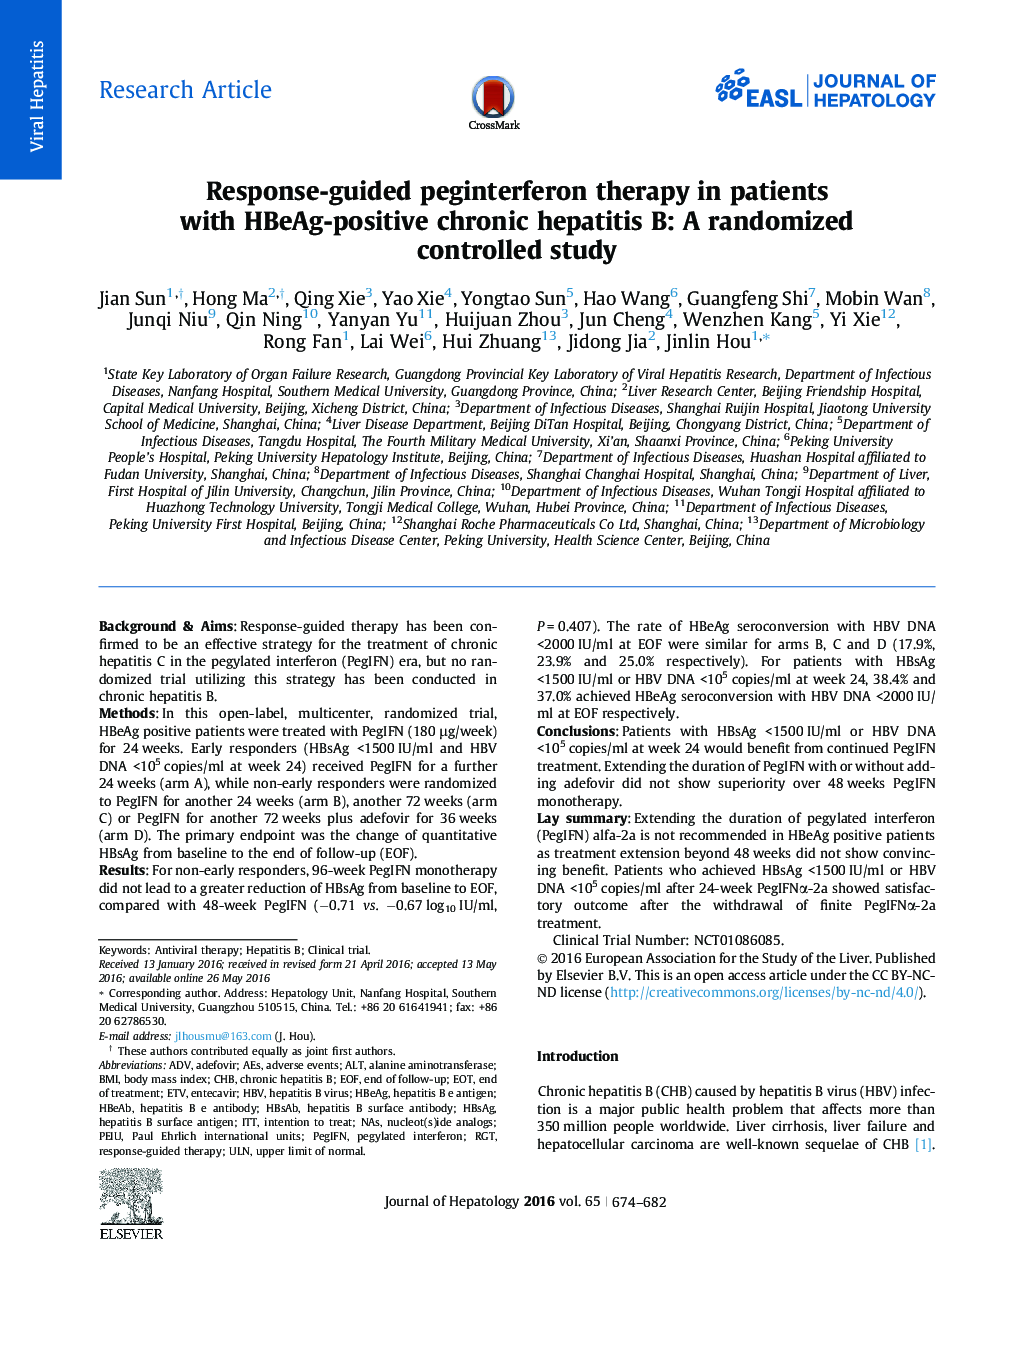 Response-guided peginterferon therapy in patients with HBeAg-positive chronic hepatitis B: A randomized controlled study